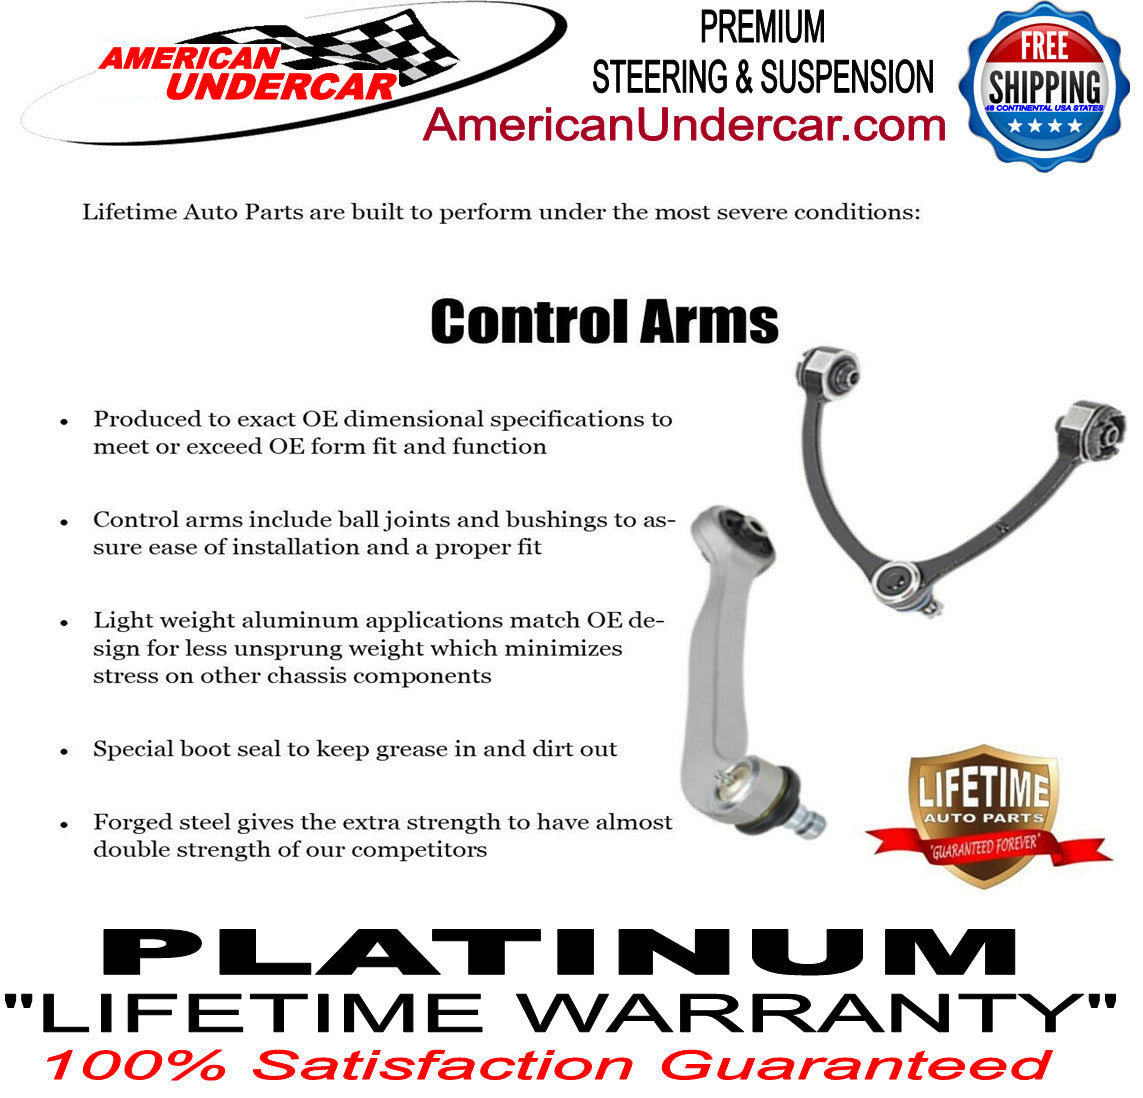 Lifetime Steering and Suspension Kit for 2001-2010 GMC Sierra 2500HD 4x4